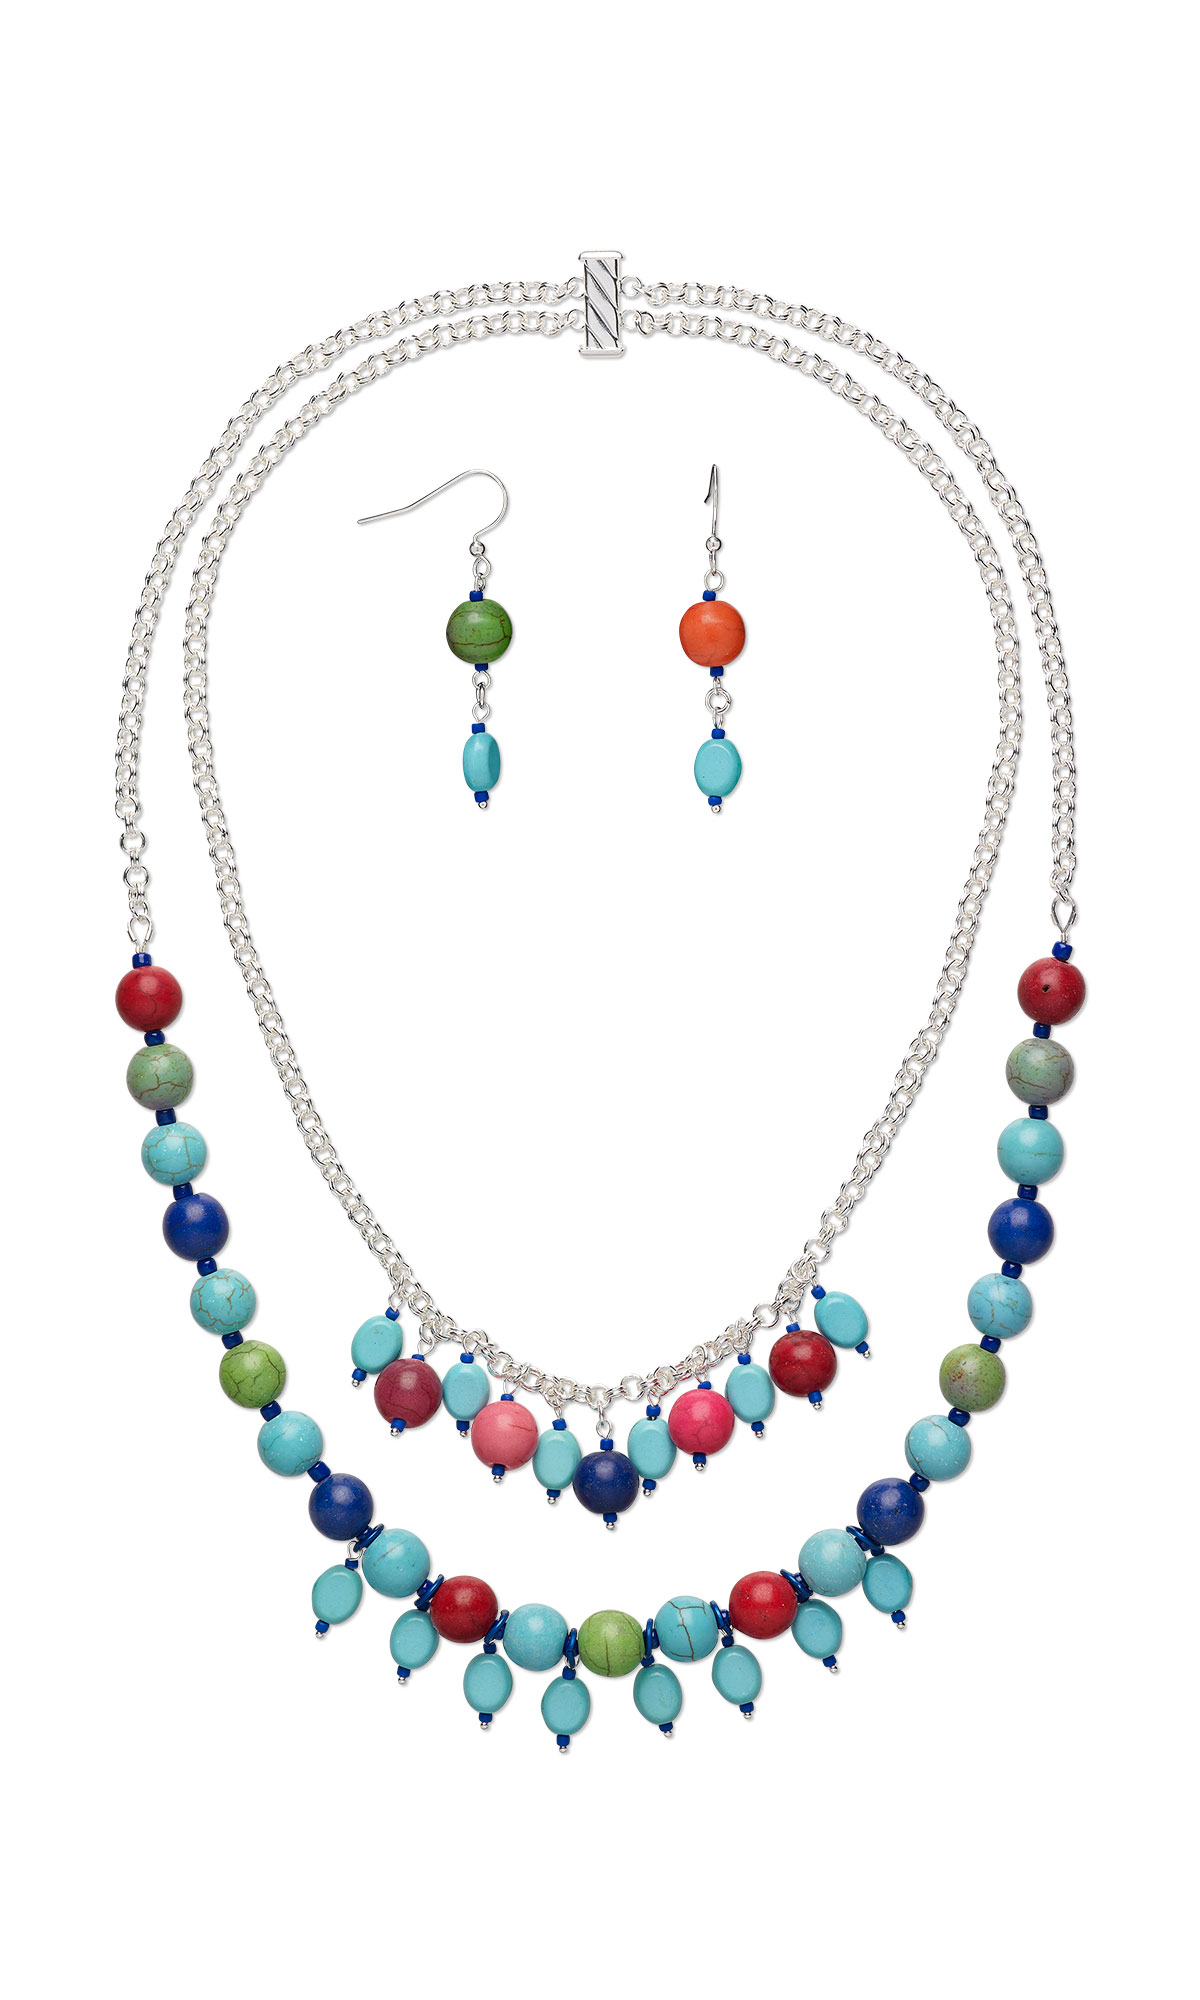 Jewelry Design - Double-Strand Necklace and Earring Set with Howlite ...